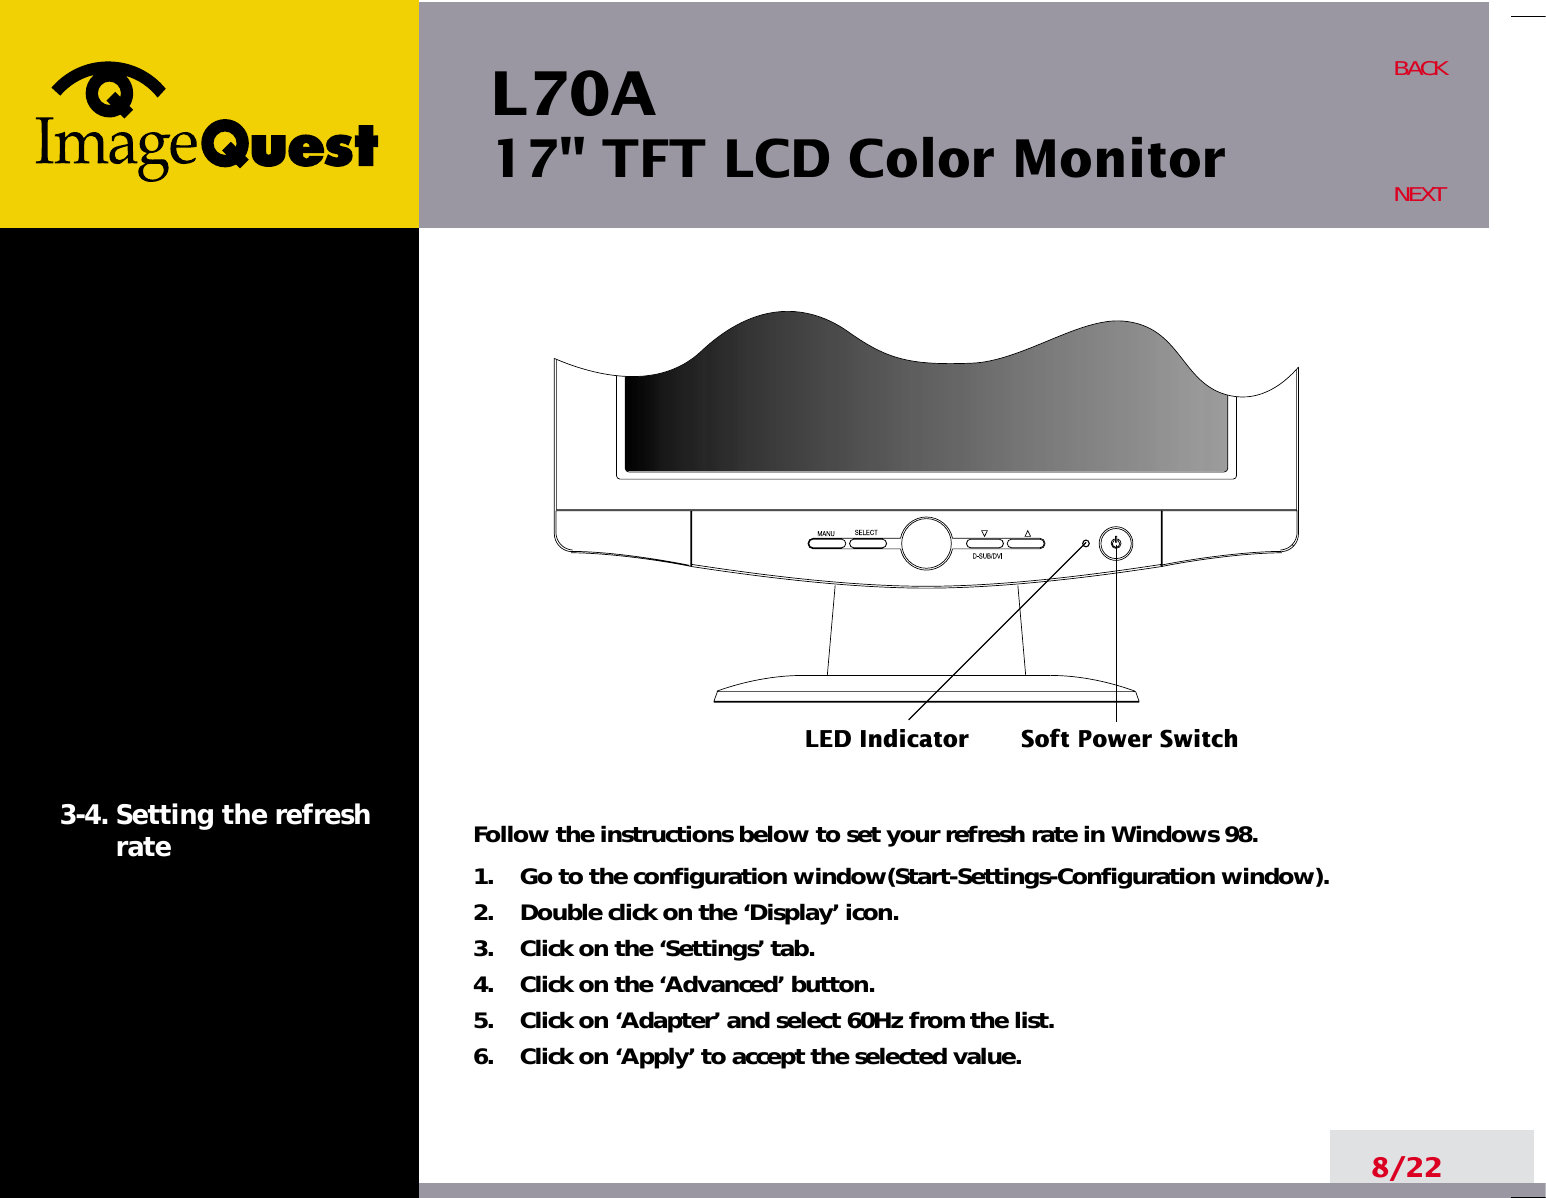 L70A17&quot; TFT LCD Color Monitor8/22BACKNEXT3-4. Setting the refreshrate Follow the instructions below to set your refresh rate in Windows 98.1.    Go to the configuration window(Start-Settings-Configuration window).2.    Double click on the ‘Display’ icon.3.    Click on the ‘Settings’ tab.4.    Click on the ‘Advanced’ button.5.    Click on ‘Adapter’ and select 60Hz from the list.6.    Click on ‘Apply’ to accept the selected value.LED Indicator Soft Power Switch